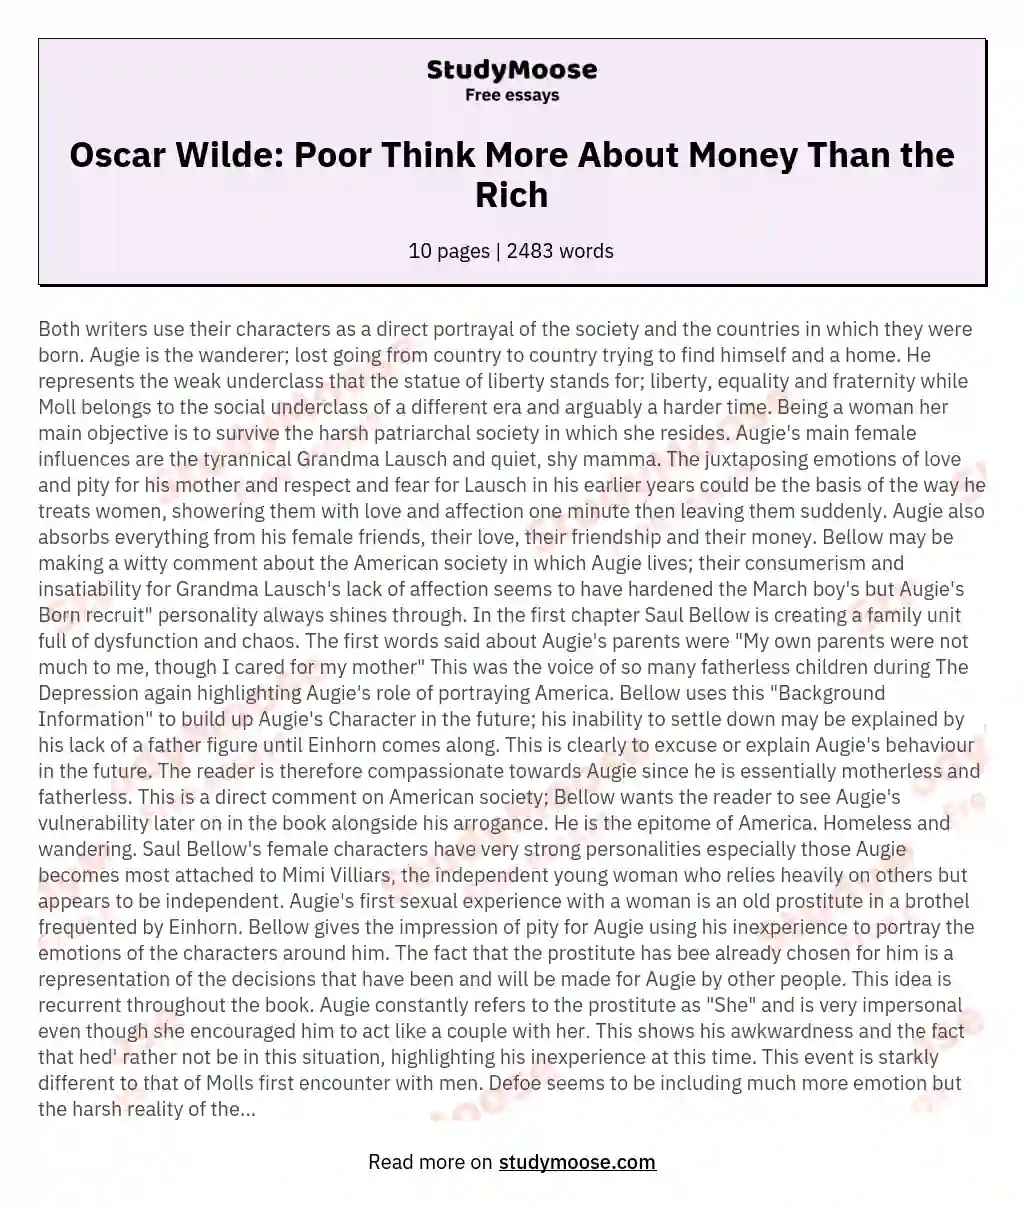 Oscar Wilde: Poor Think More About Money Than the Rich essay